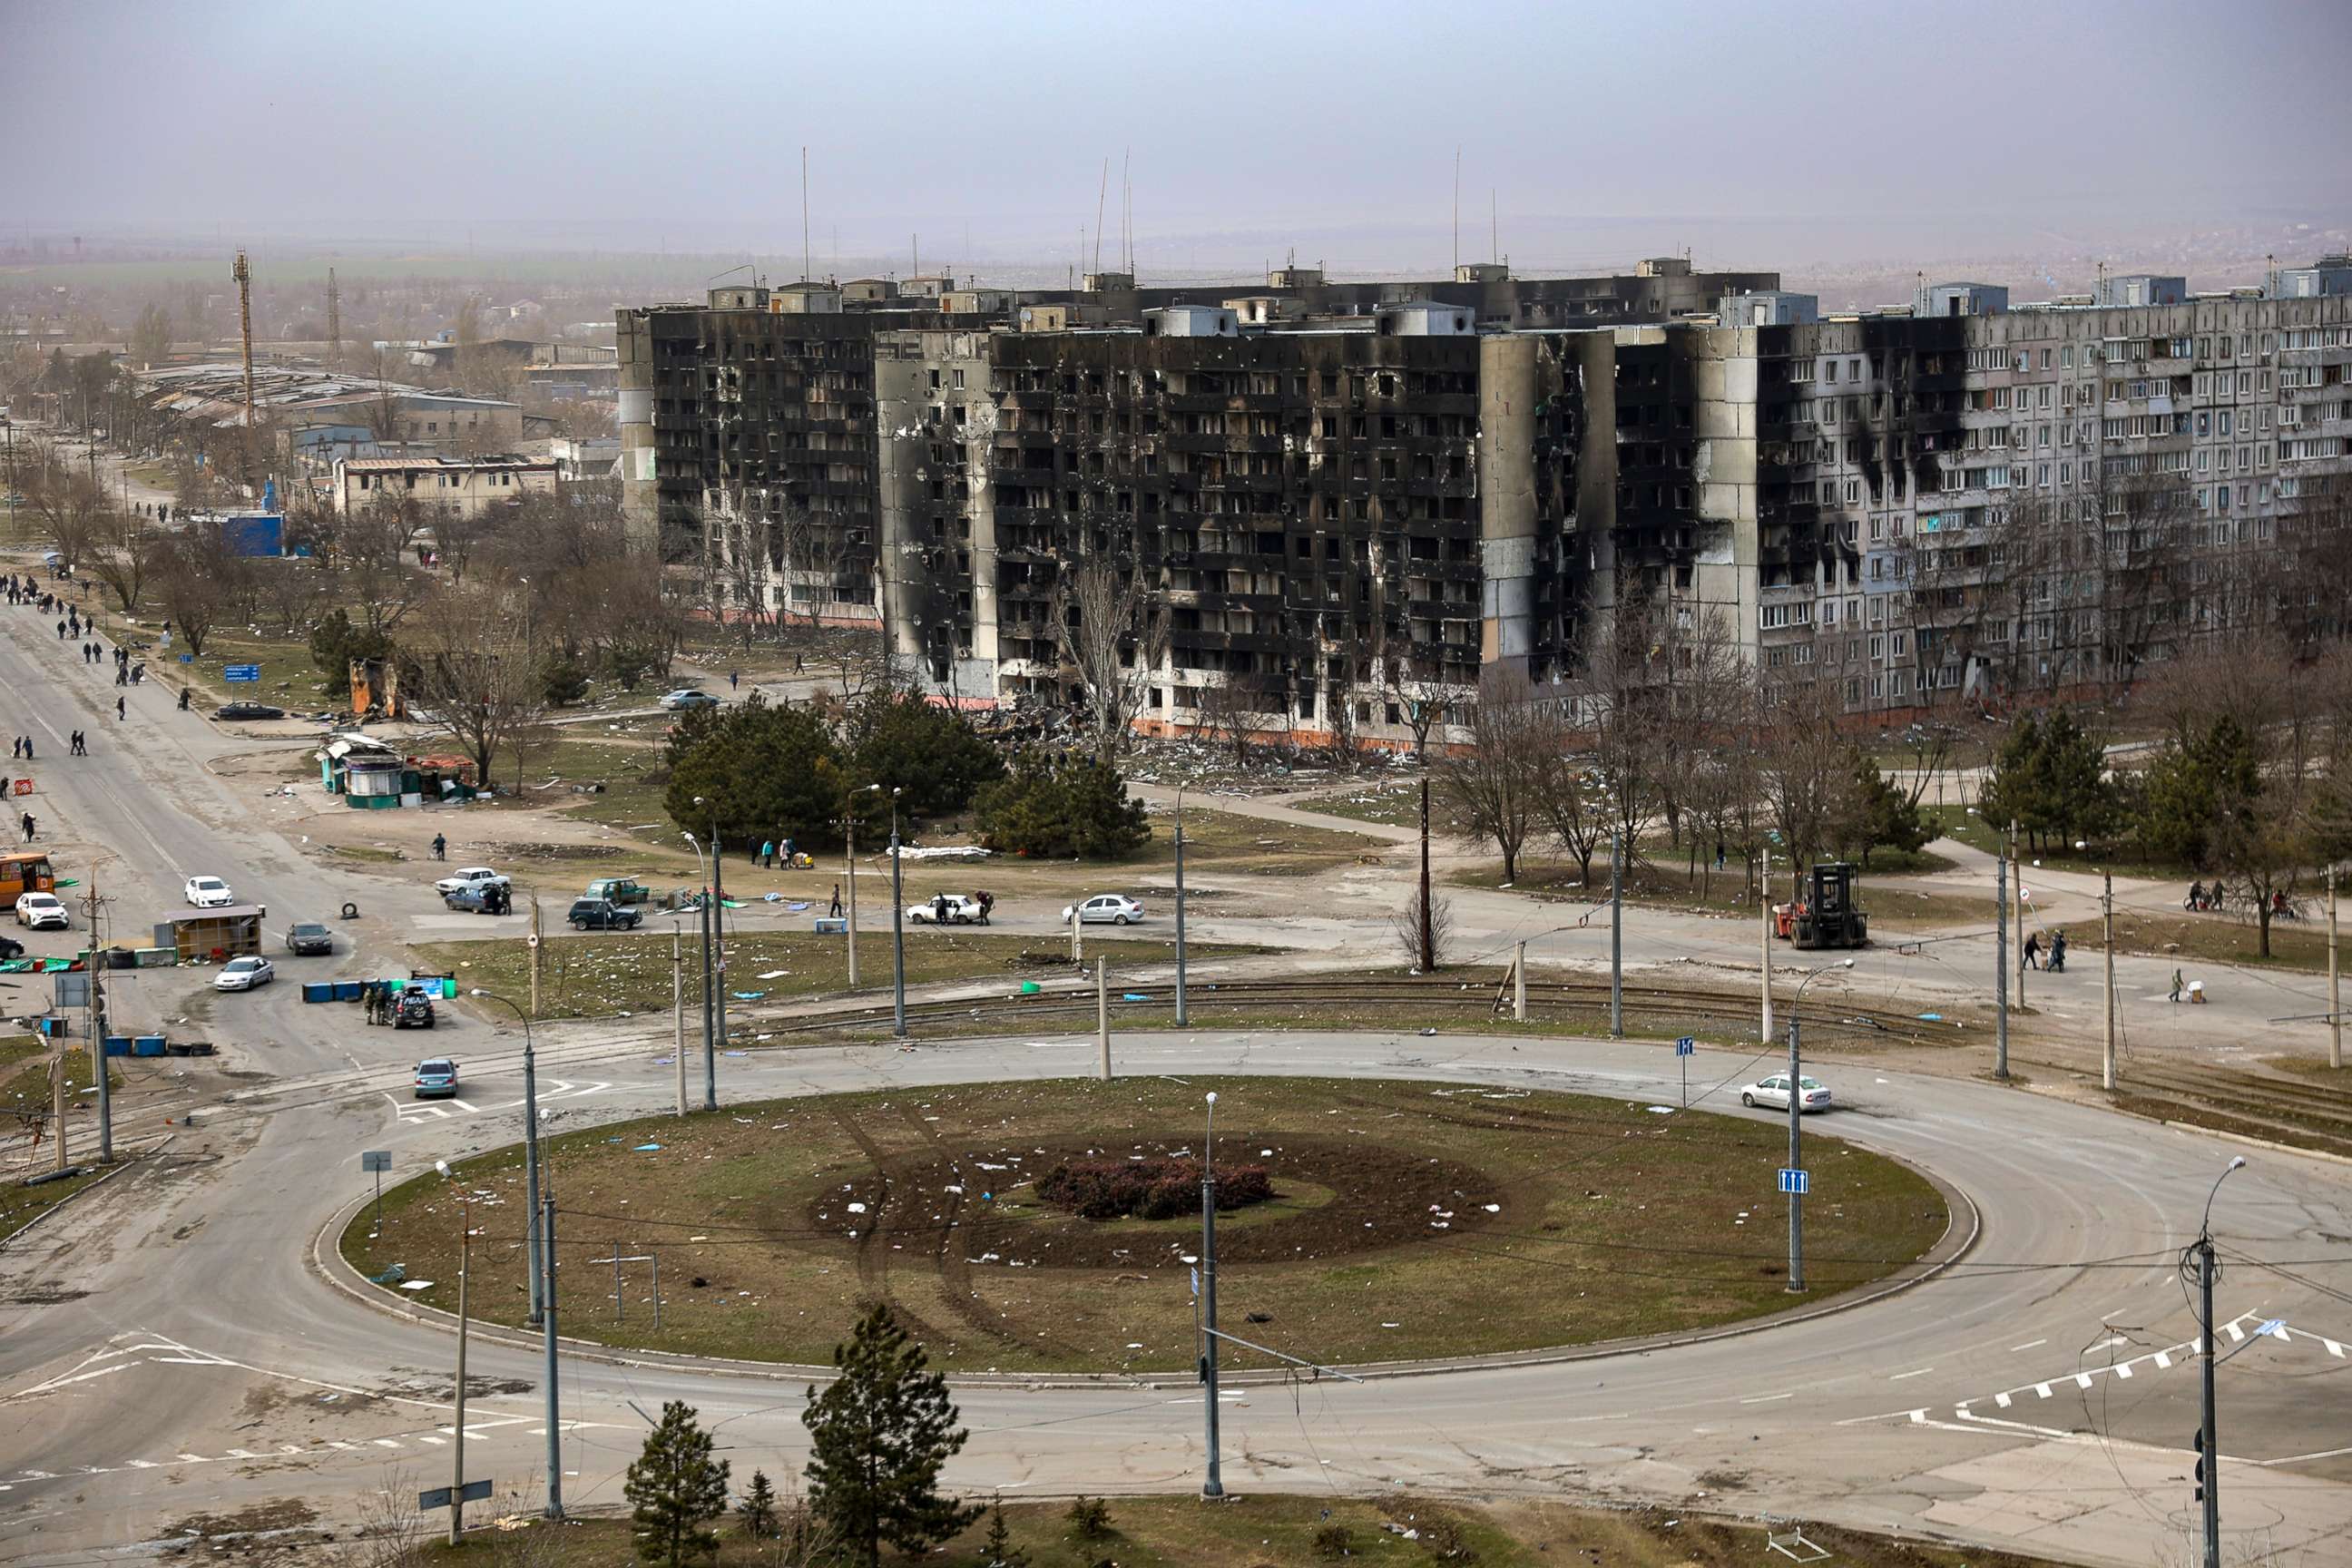 PHOTO: Damage is seen on apartment buildings after shelling from fighting on the outskirts of Mariupol, Ukraine, in territory under control of the separatist government of the Donetsk People's Republic, March 29, 2022. 